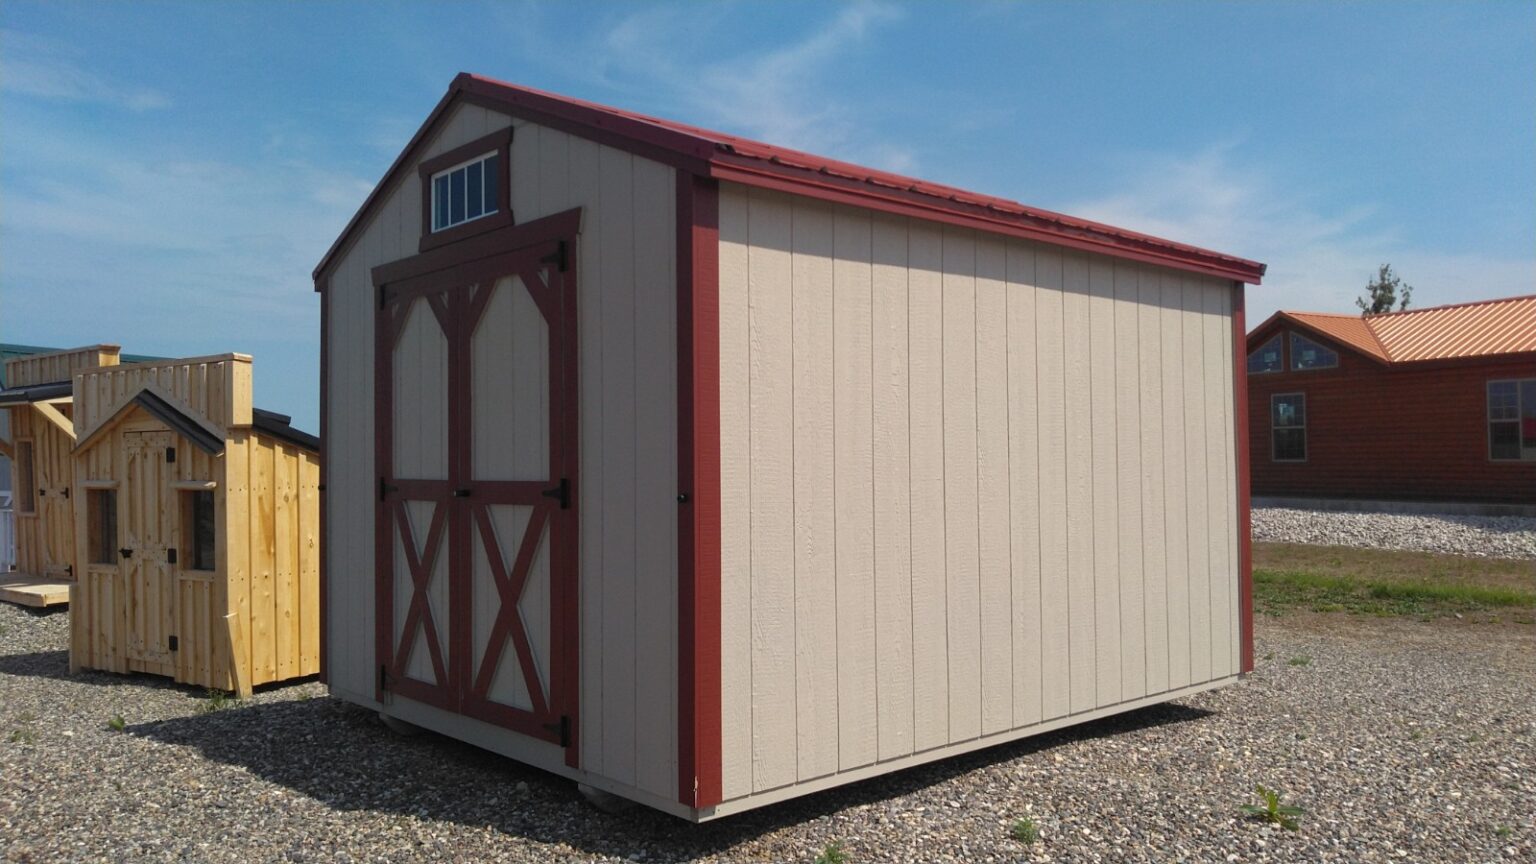 Silver maple and red 10x12 garden shed.